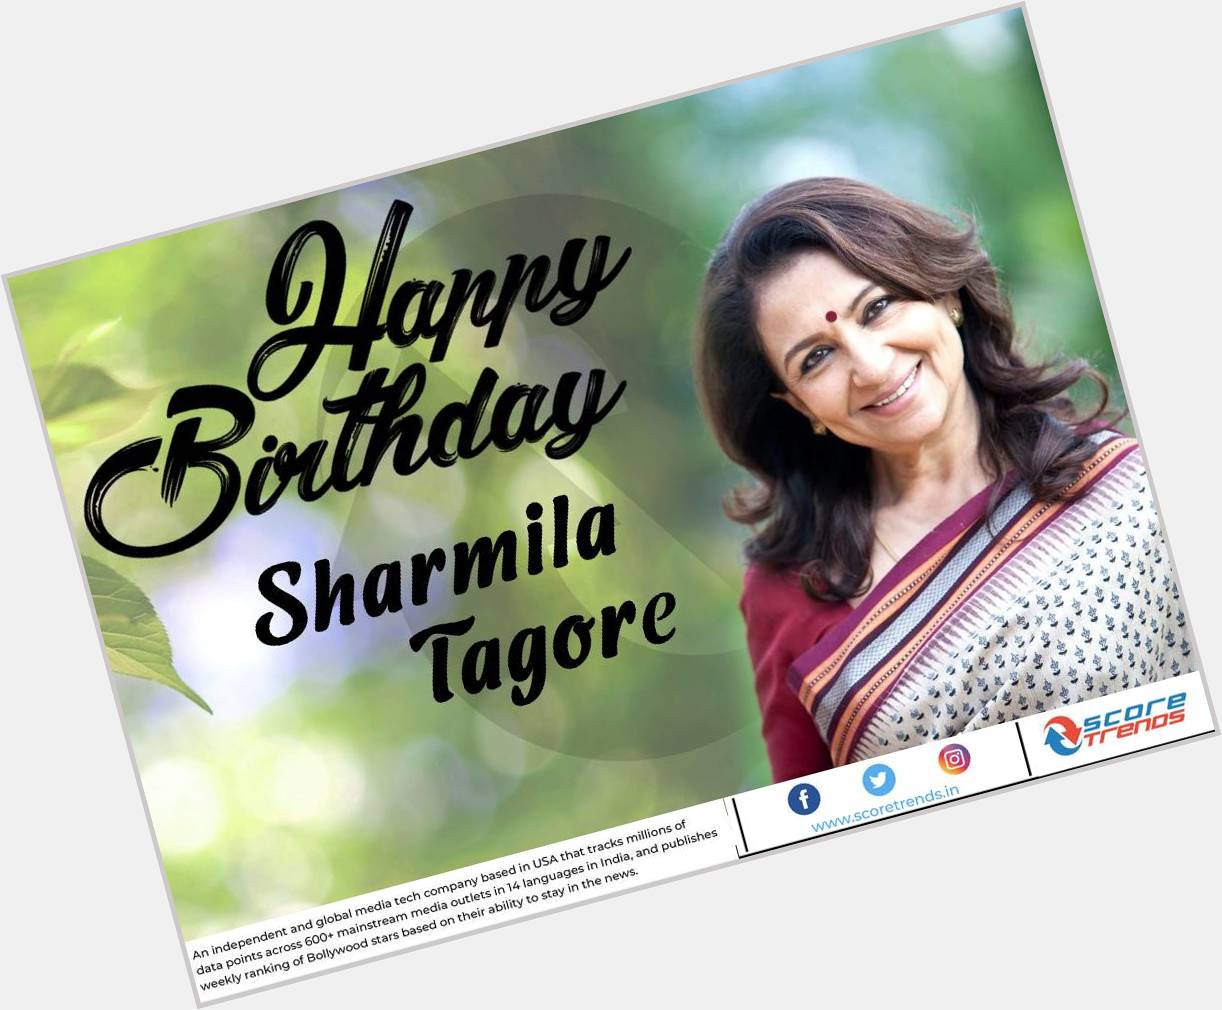 Score Trends wishes Sharmila Tagore a Happy Birthday!! 